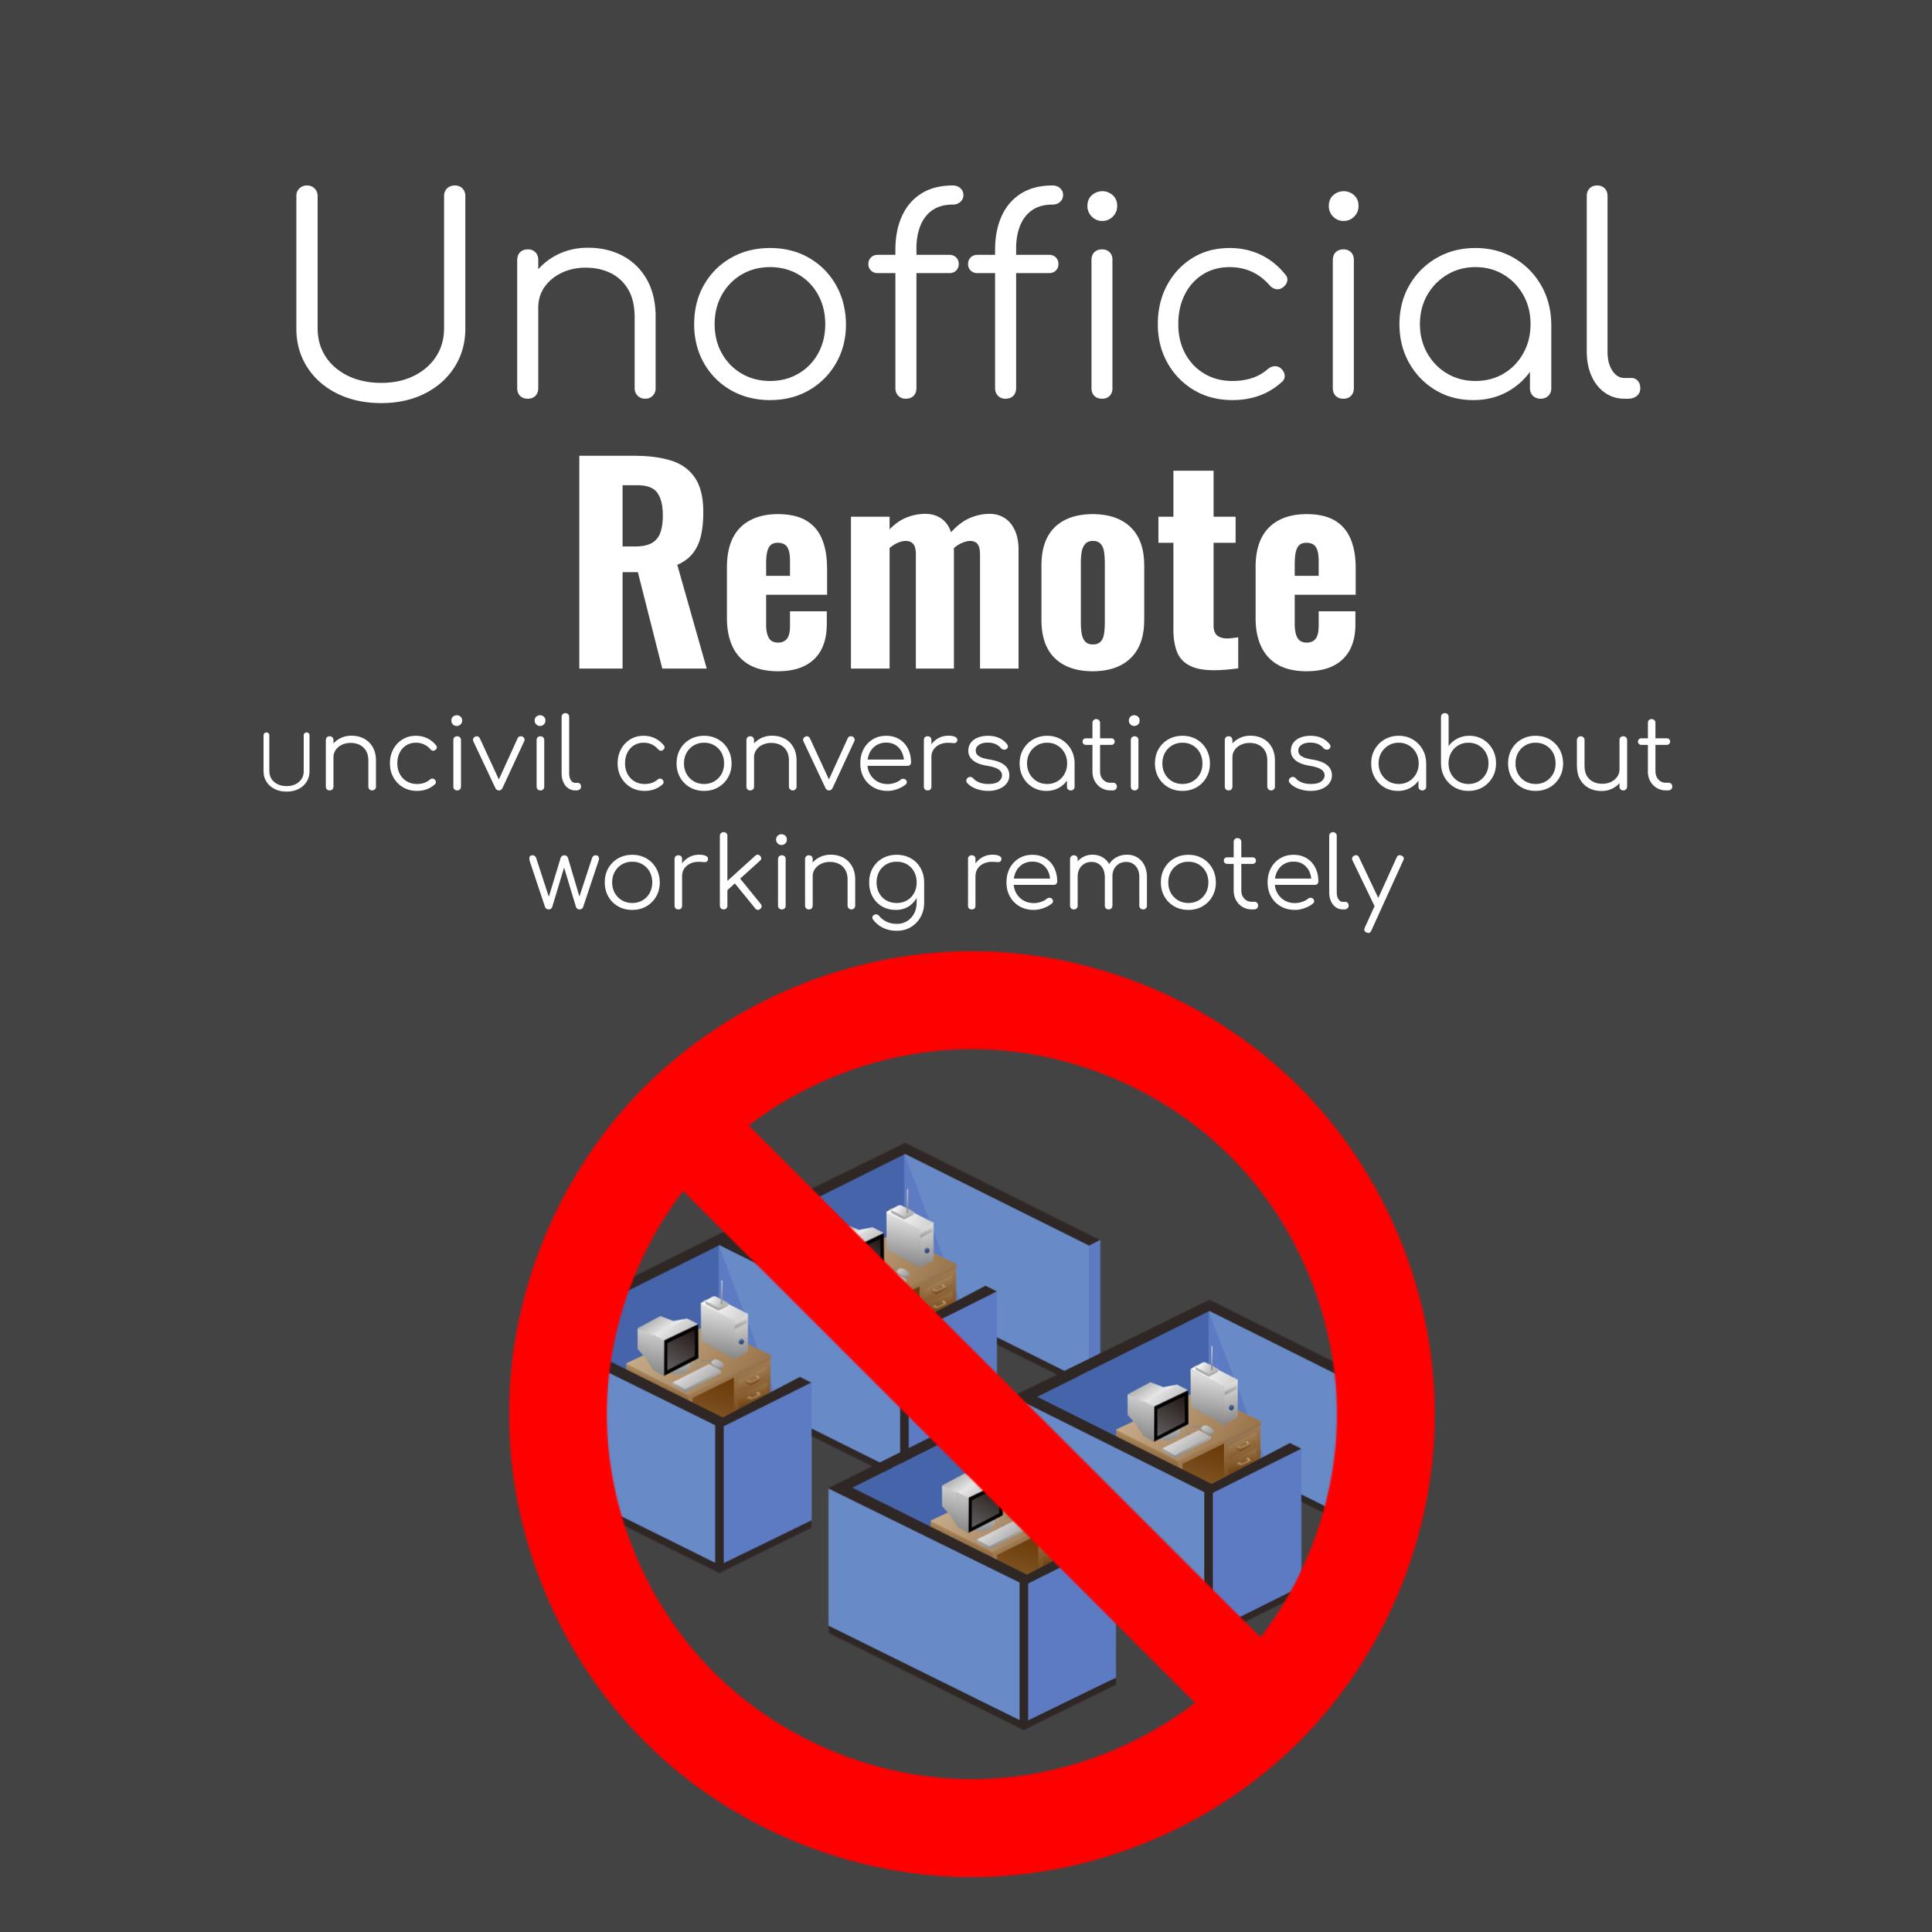 Find Yourself Unexpectedly Remote? (So did our guest) Part 2